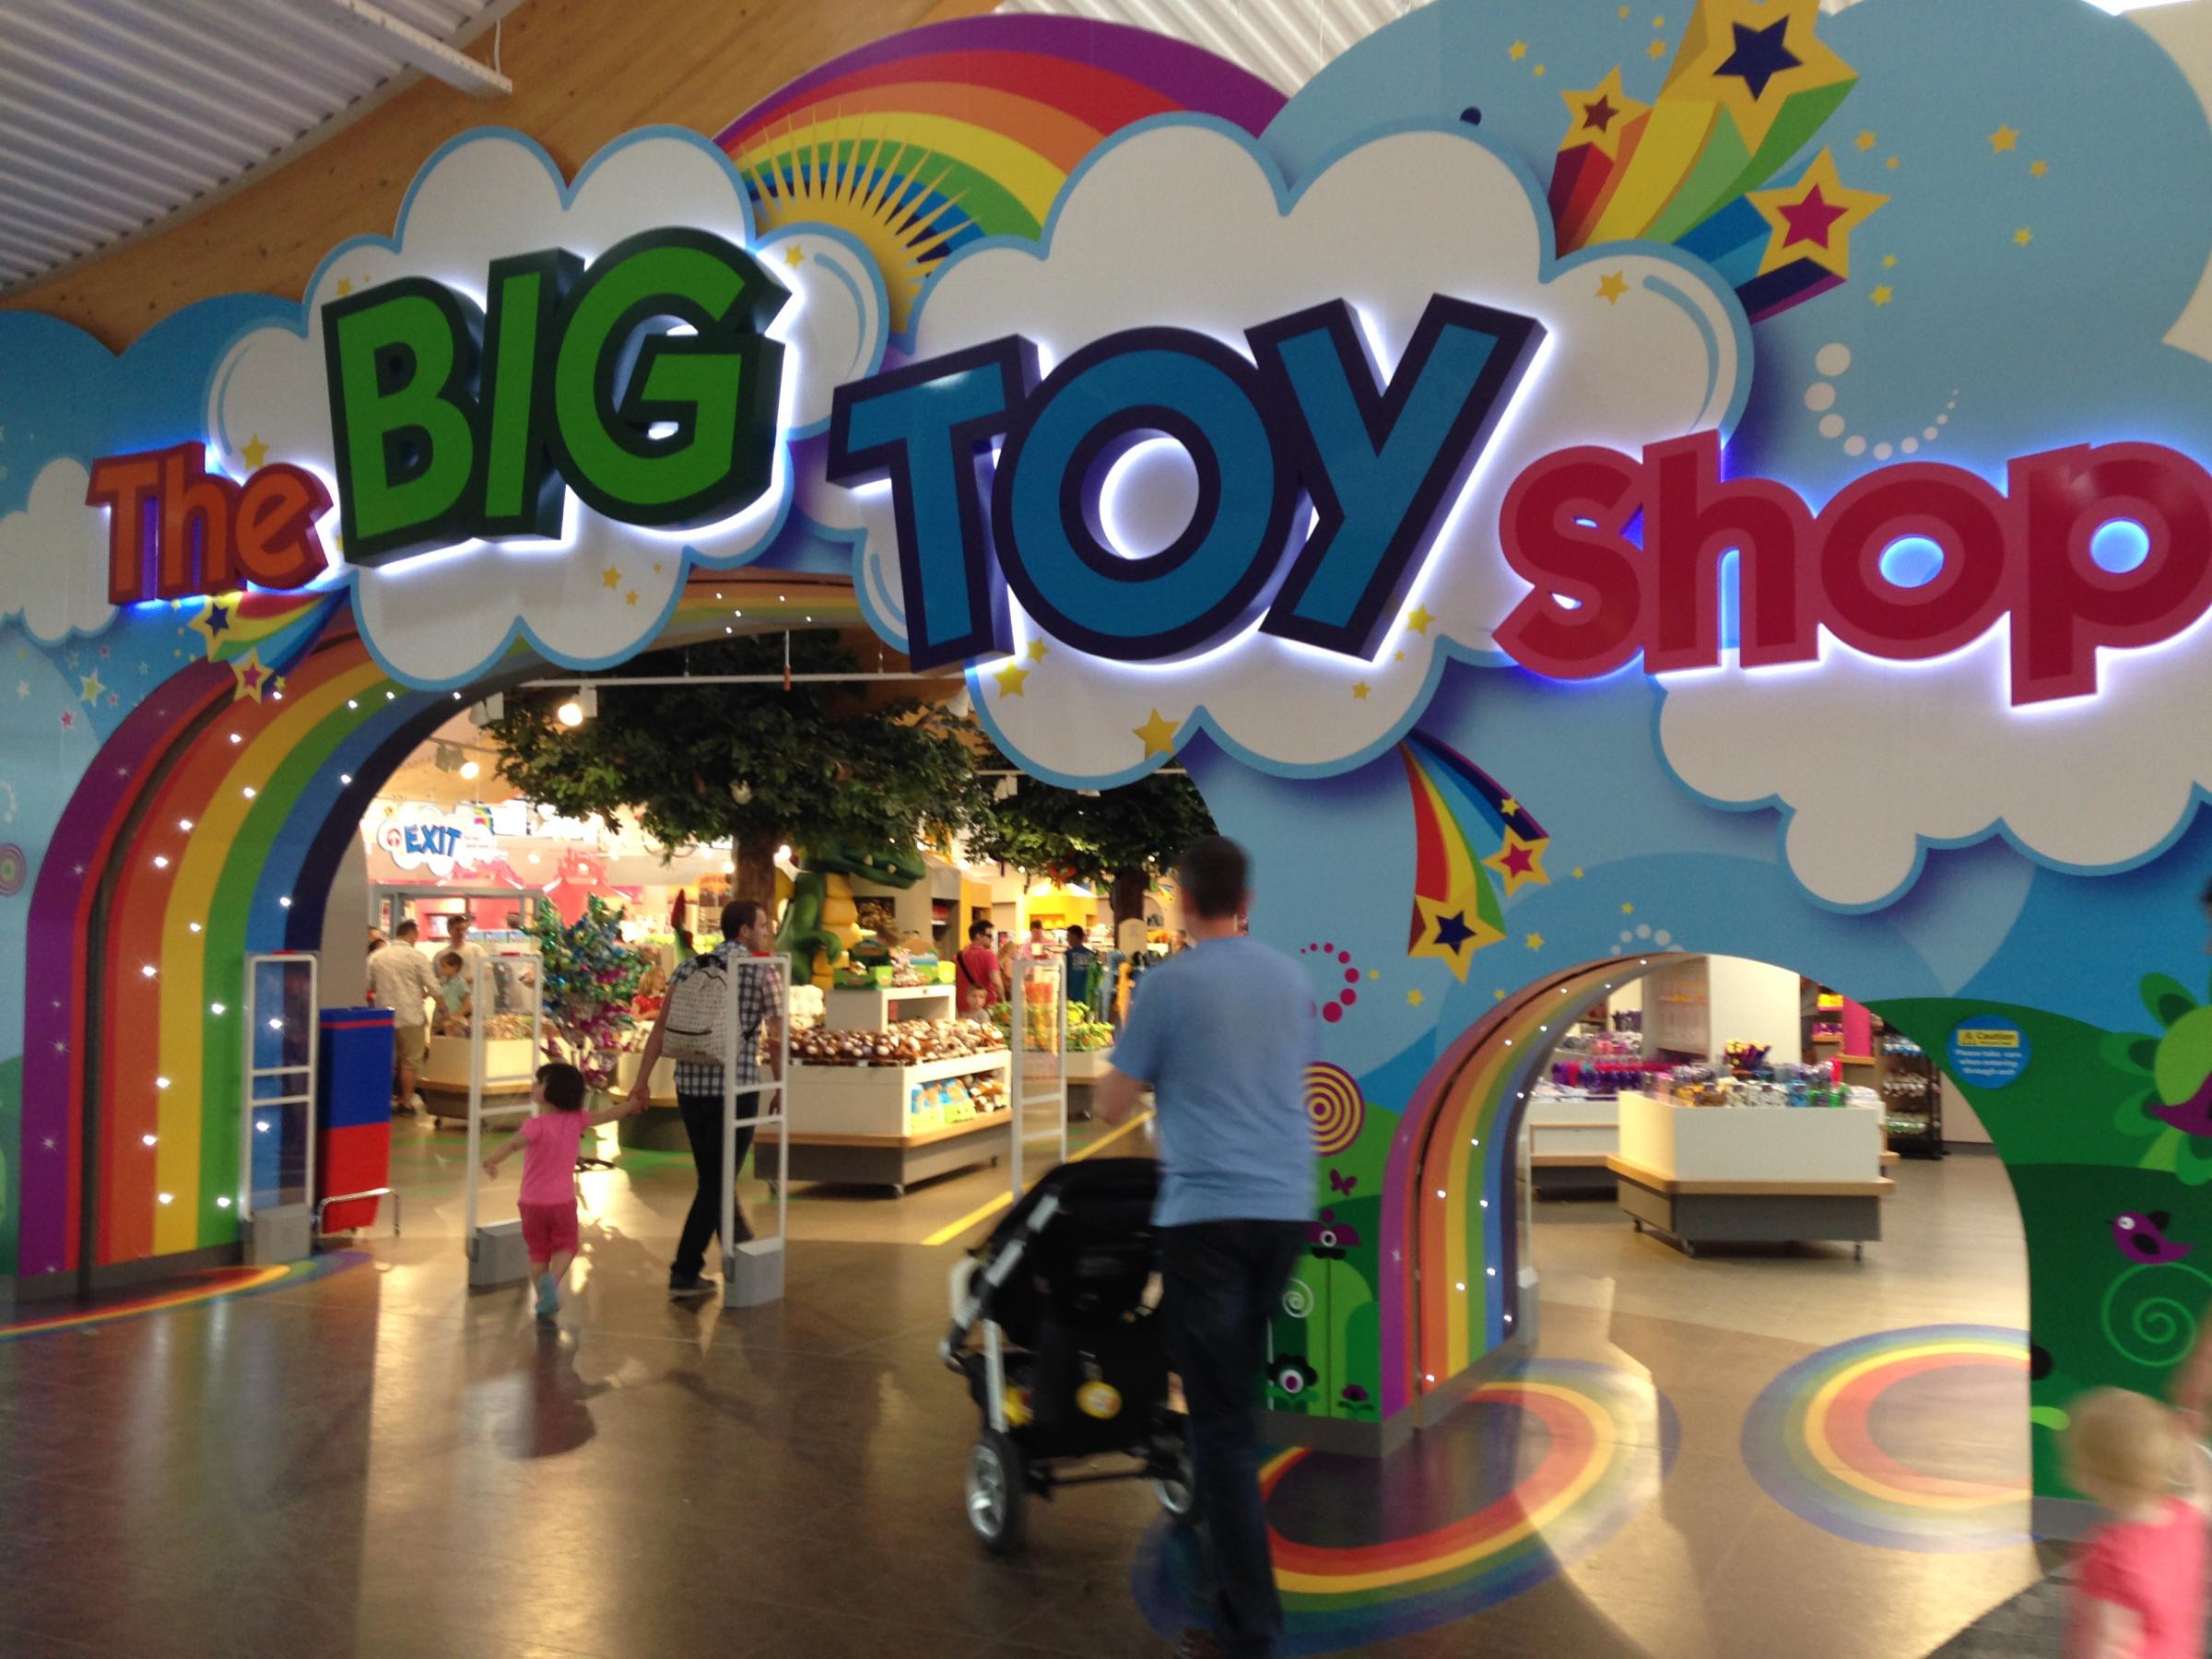 cafe shop and play centre toy